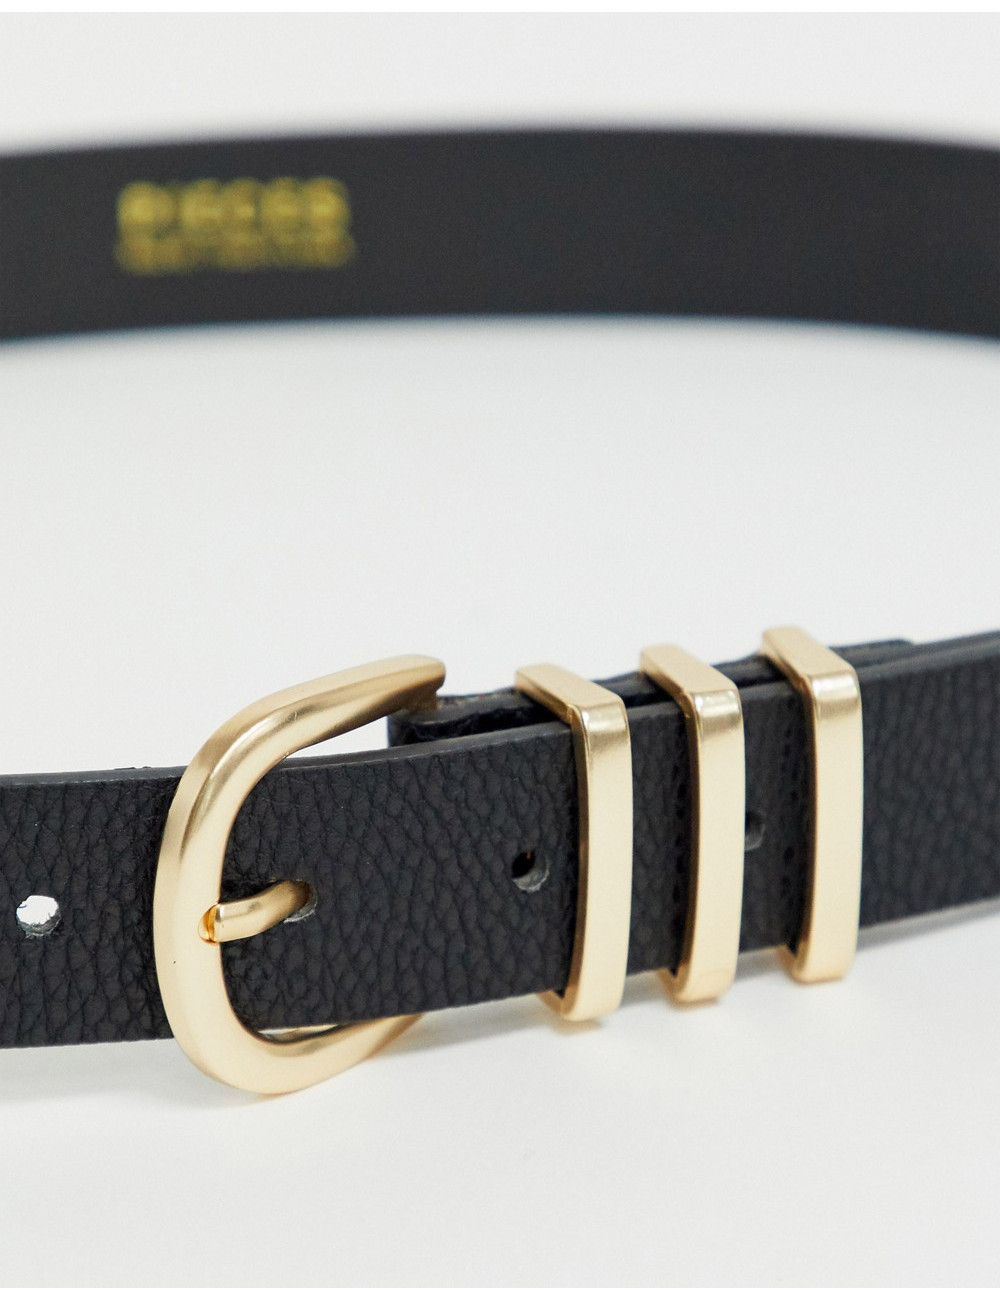 Pieces gold buckle belt in...